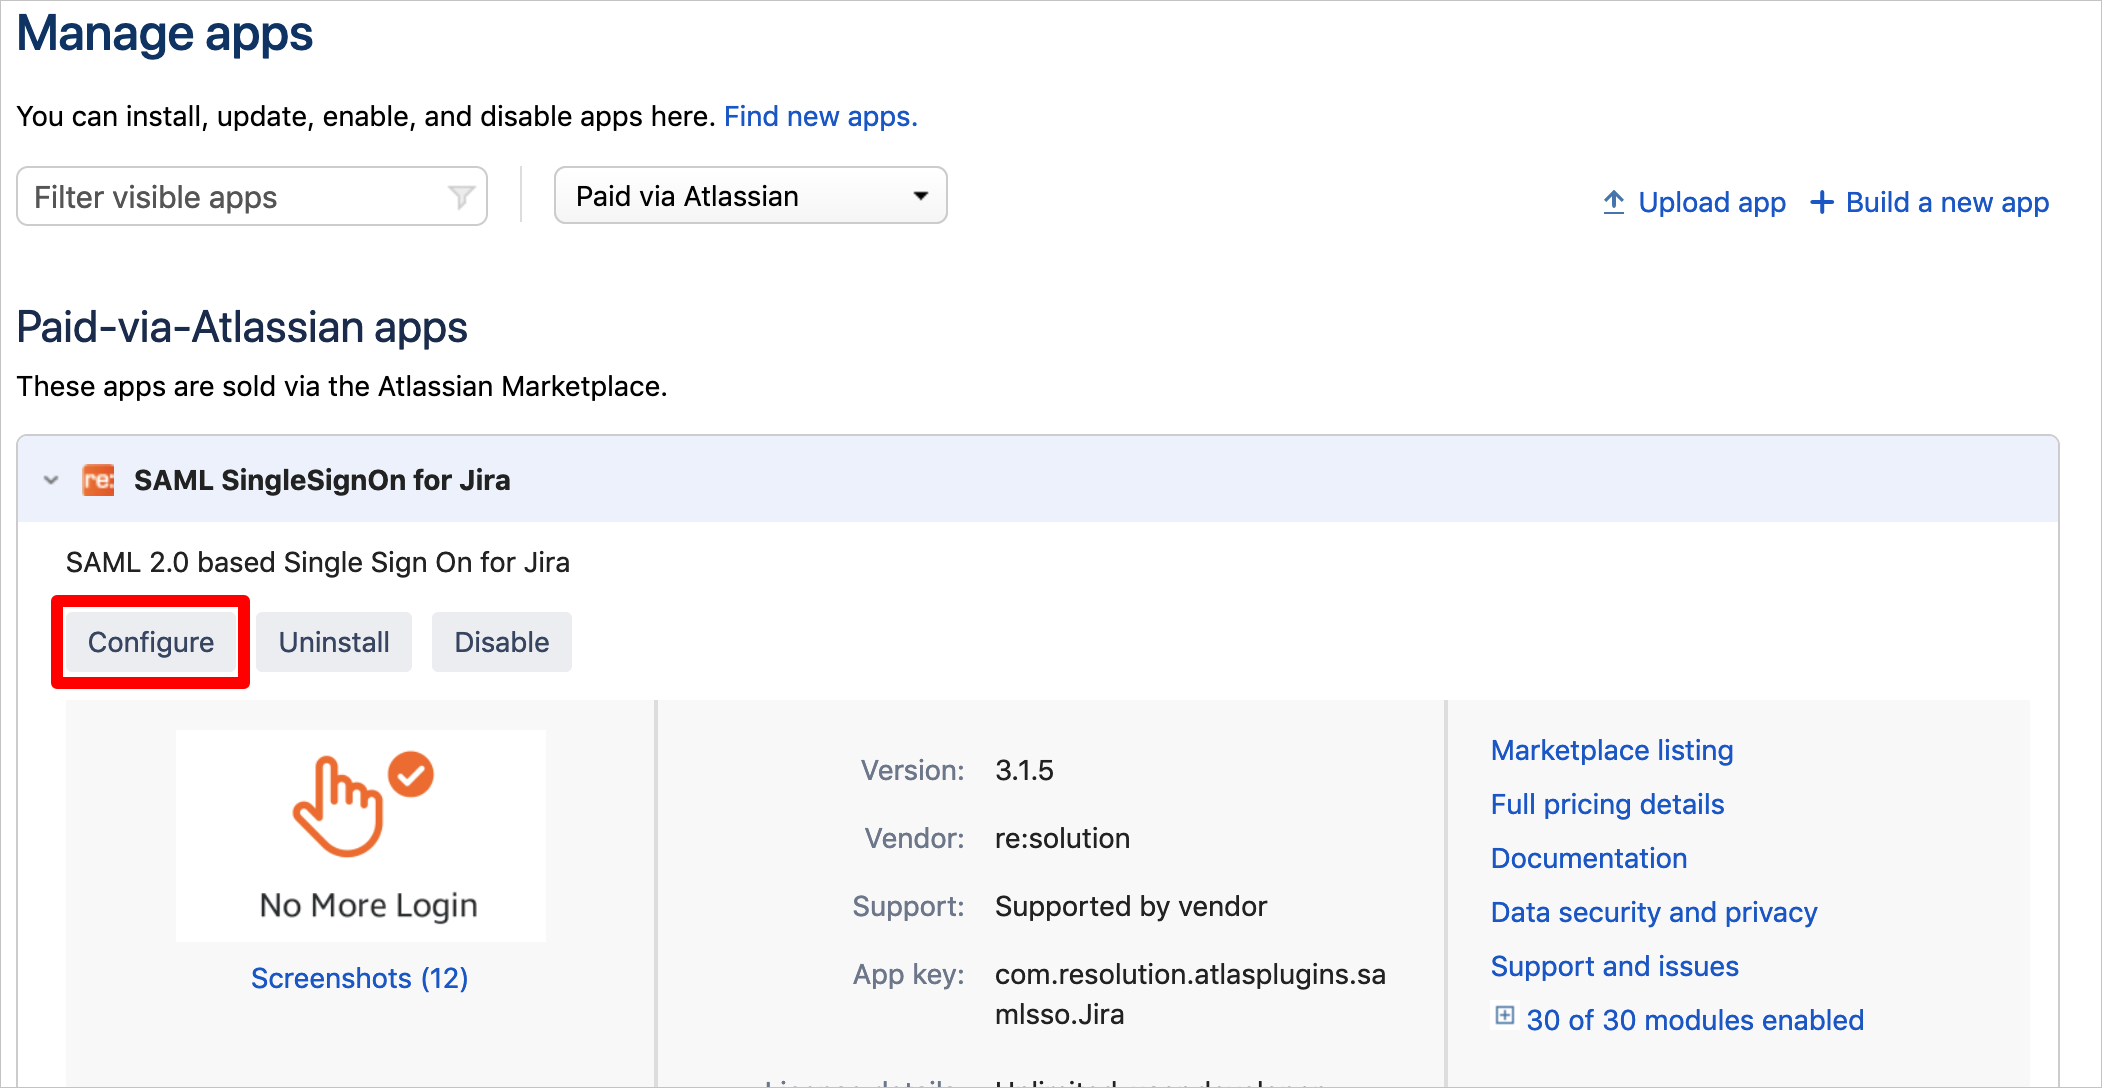 Screenshot that shows the "Manage apps" page, with the "Configure" button selected for the "S A M L SingleSignOn for Jira" app.